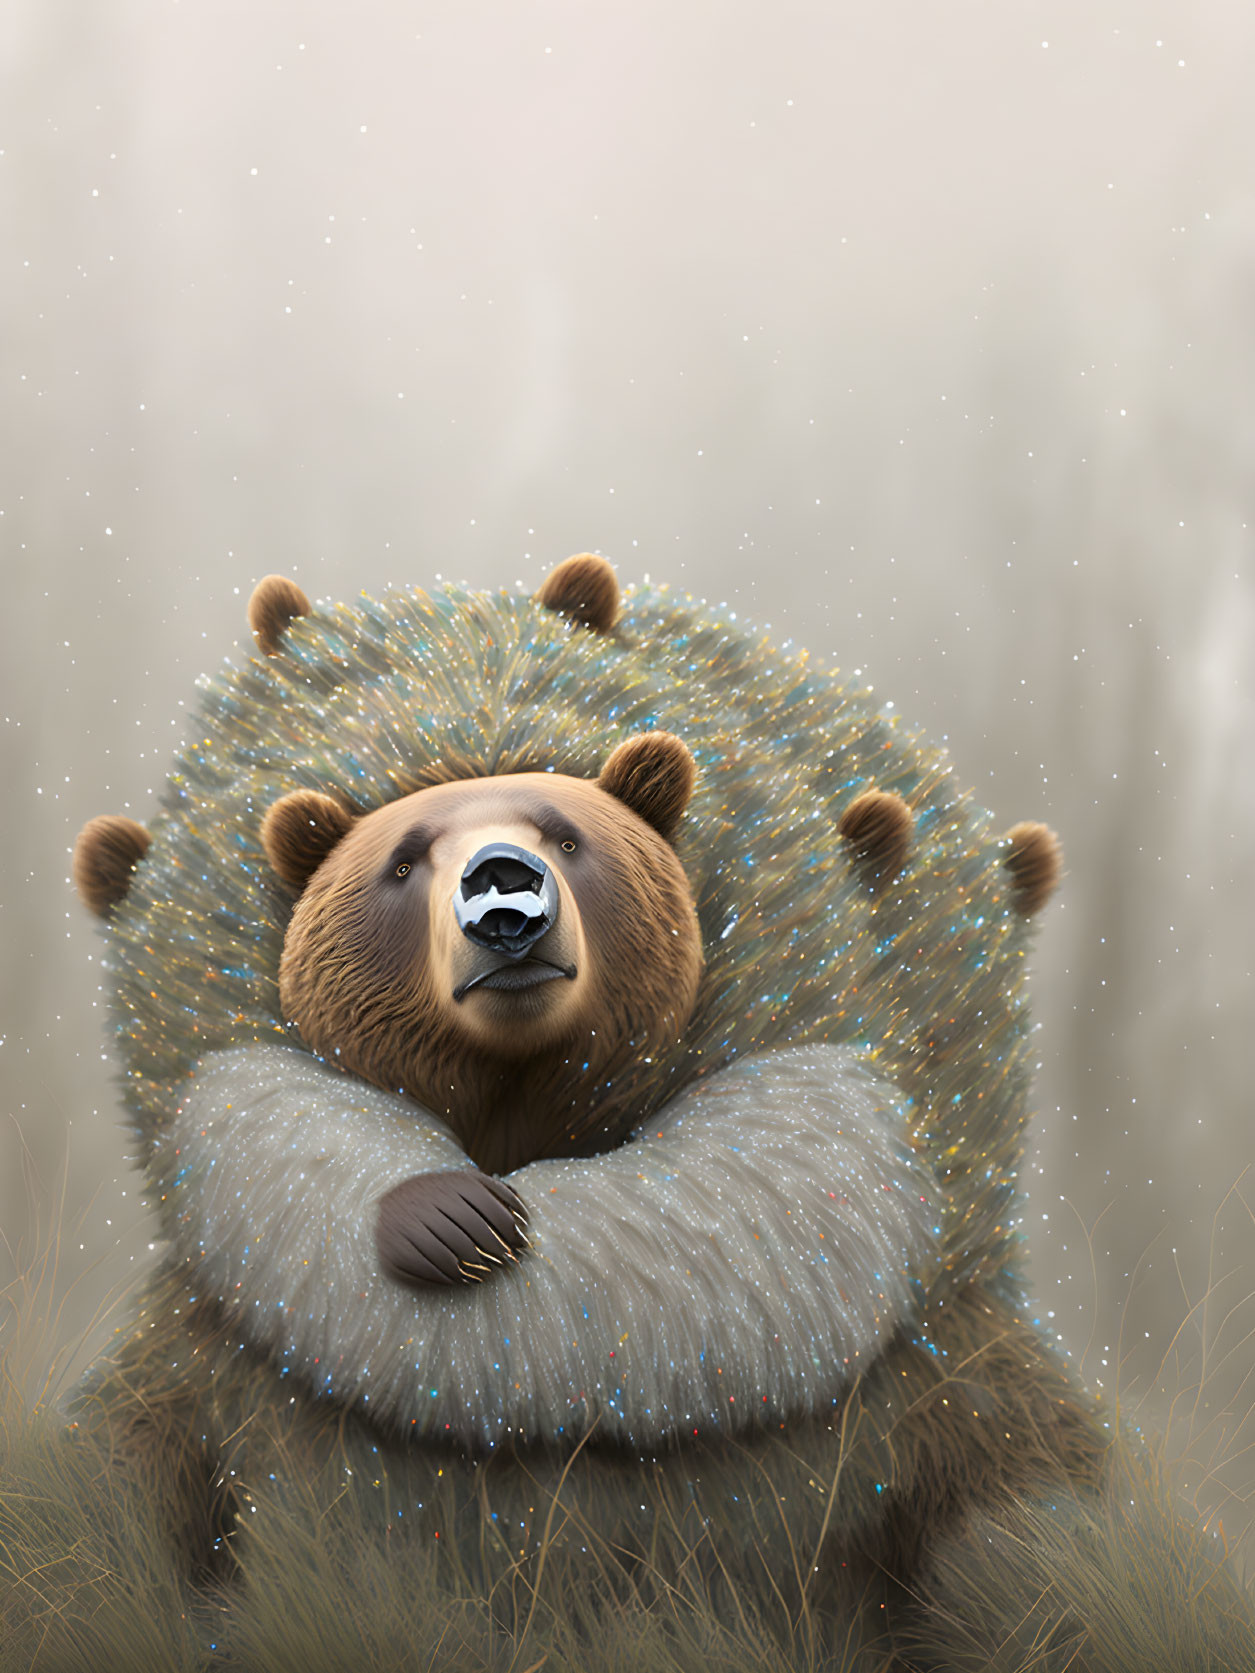 Illustration of a bear with spiny back and gentle expression